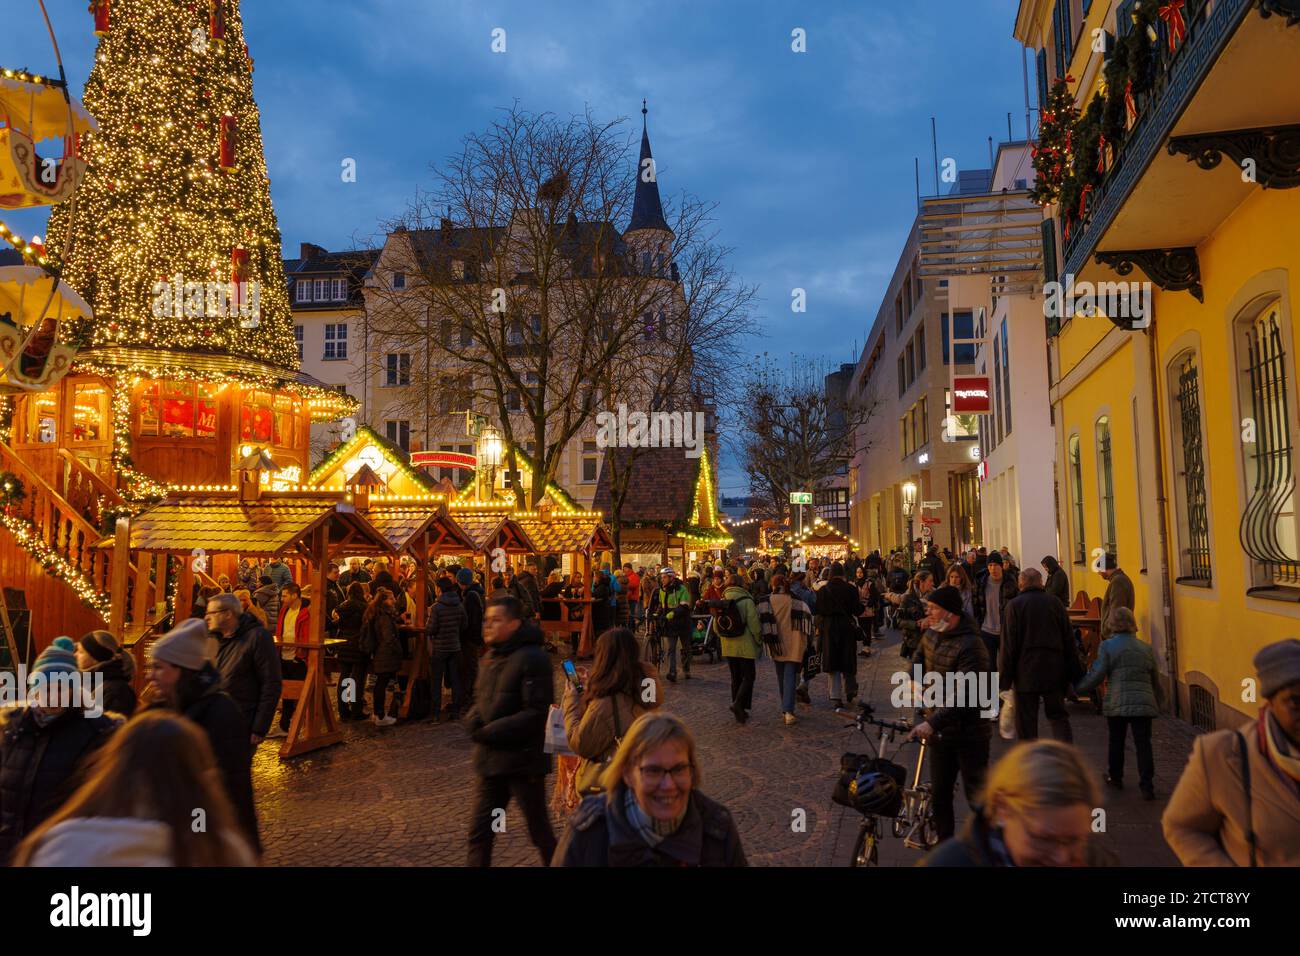 Bonn, Germany - Dec 6, 2023: View of a crowded Christmas market with festive lights, decorated tree, and holiday stalls, with a large illuminated emer Stock Photo